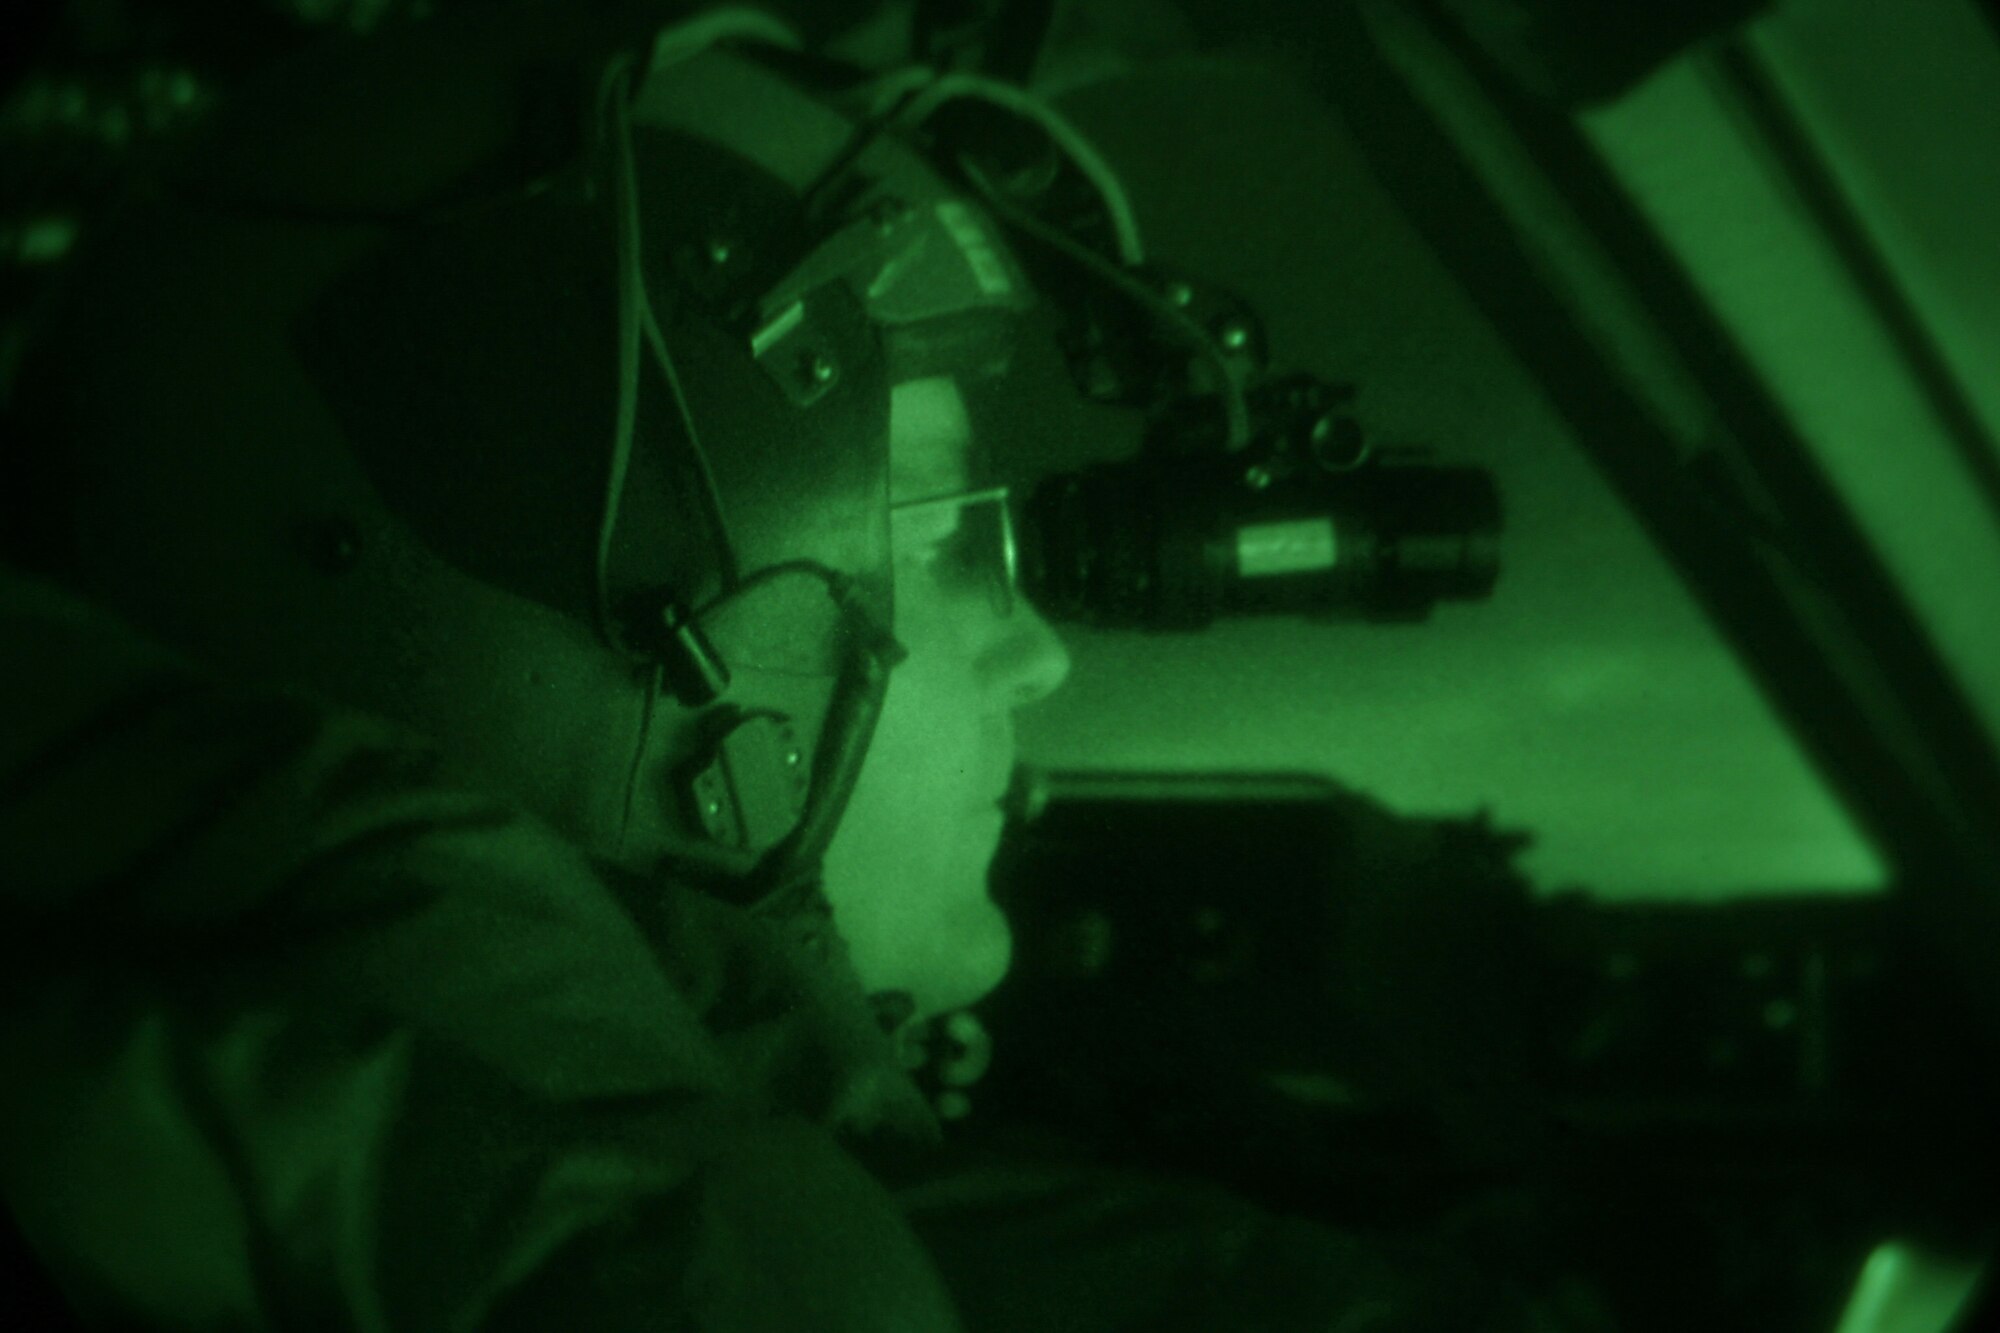 Lt. Col. Robert Weichert, a C-17 evaluator pilot with the 313th Airlift Squadron at McChord Air Force Base, Wash., looks out over the ice after the first-ever night vision goggle-assisted landing on Pegasus Ice Runway near McMurdo Station, Antarctica, Sept. 11.  Colonel Weichert is part of a crew testing the concept of using night vision technology in combination with reflective cones to land safely on the ice runway after dark.  The mission was flown as part of Operation Deep Freeze, commanded by U.S. Pacific Command's Joint Task Force Support Forces Antarctica.  Headquartered at Hickam AFB, Hawaii, and led by 13th Air Force, JTF SFA's mission is to provide air- and sealift support to the National Science Foundation and U.S. Antarctic Program. (US Air Force photo / Master Sgt. Chris Vadnais)